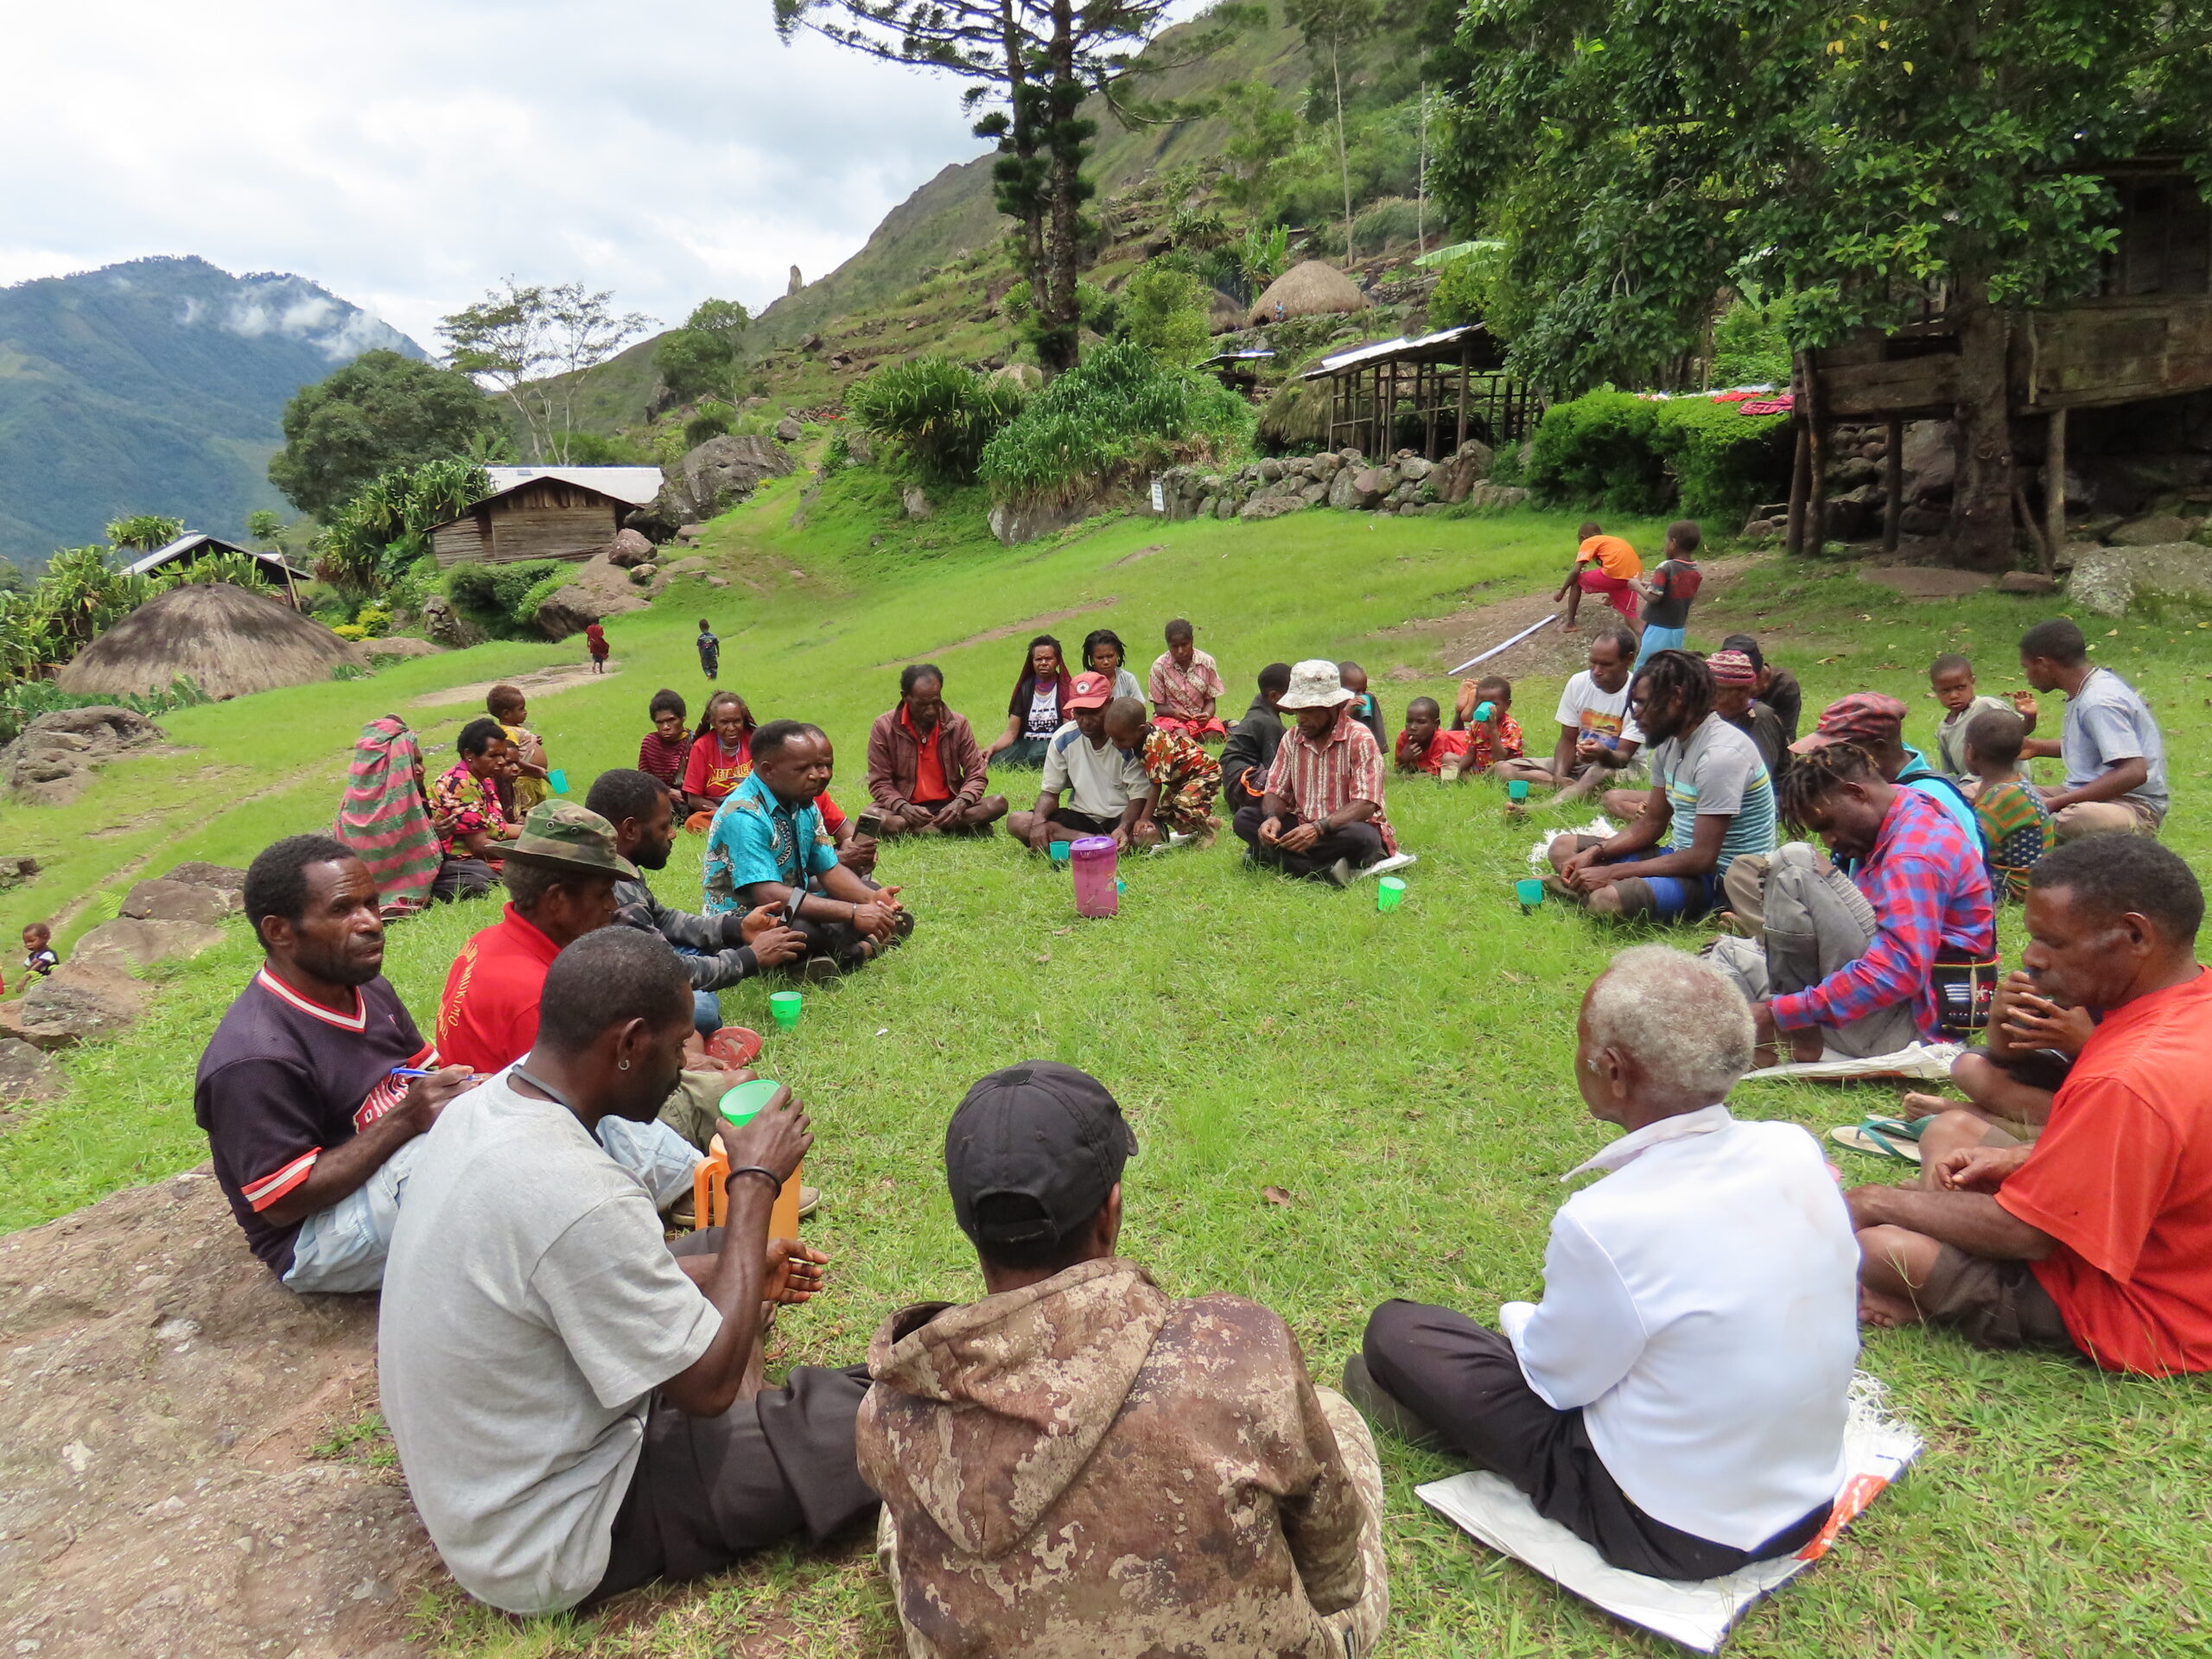 Community members in Papua sit in a circle in an open grassy area to discuss.